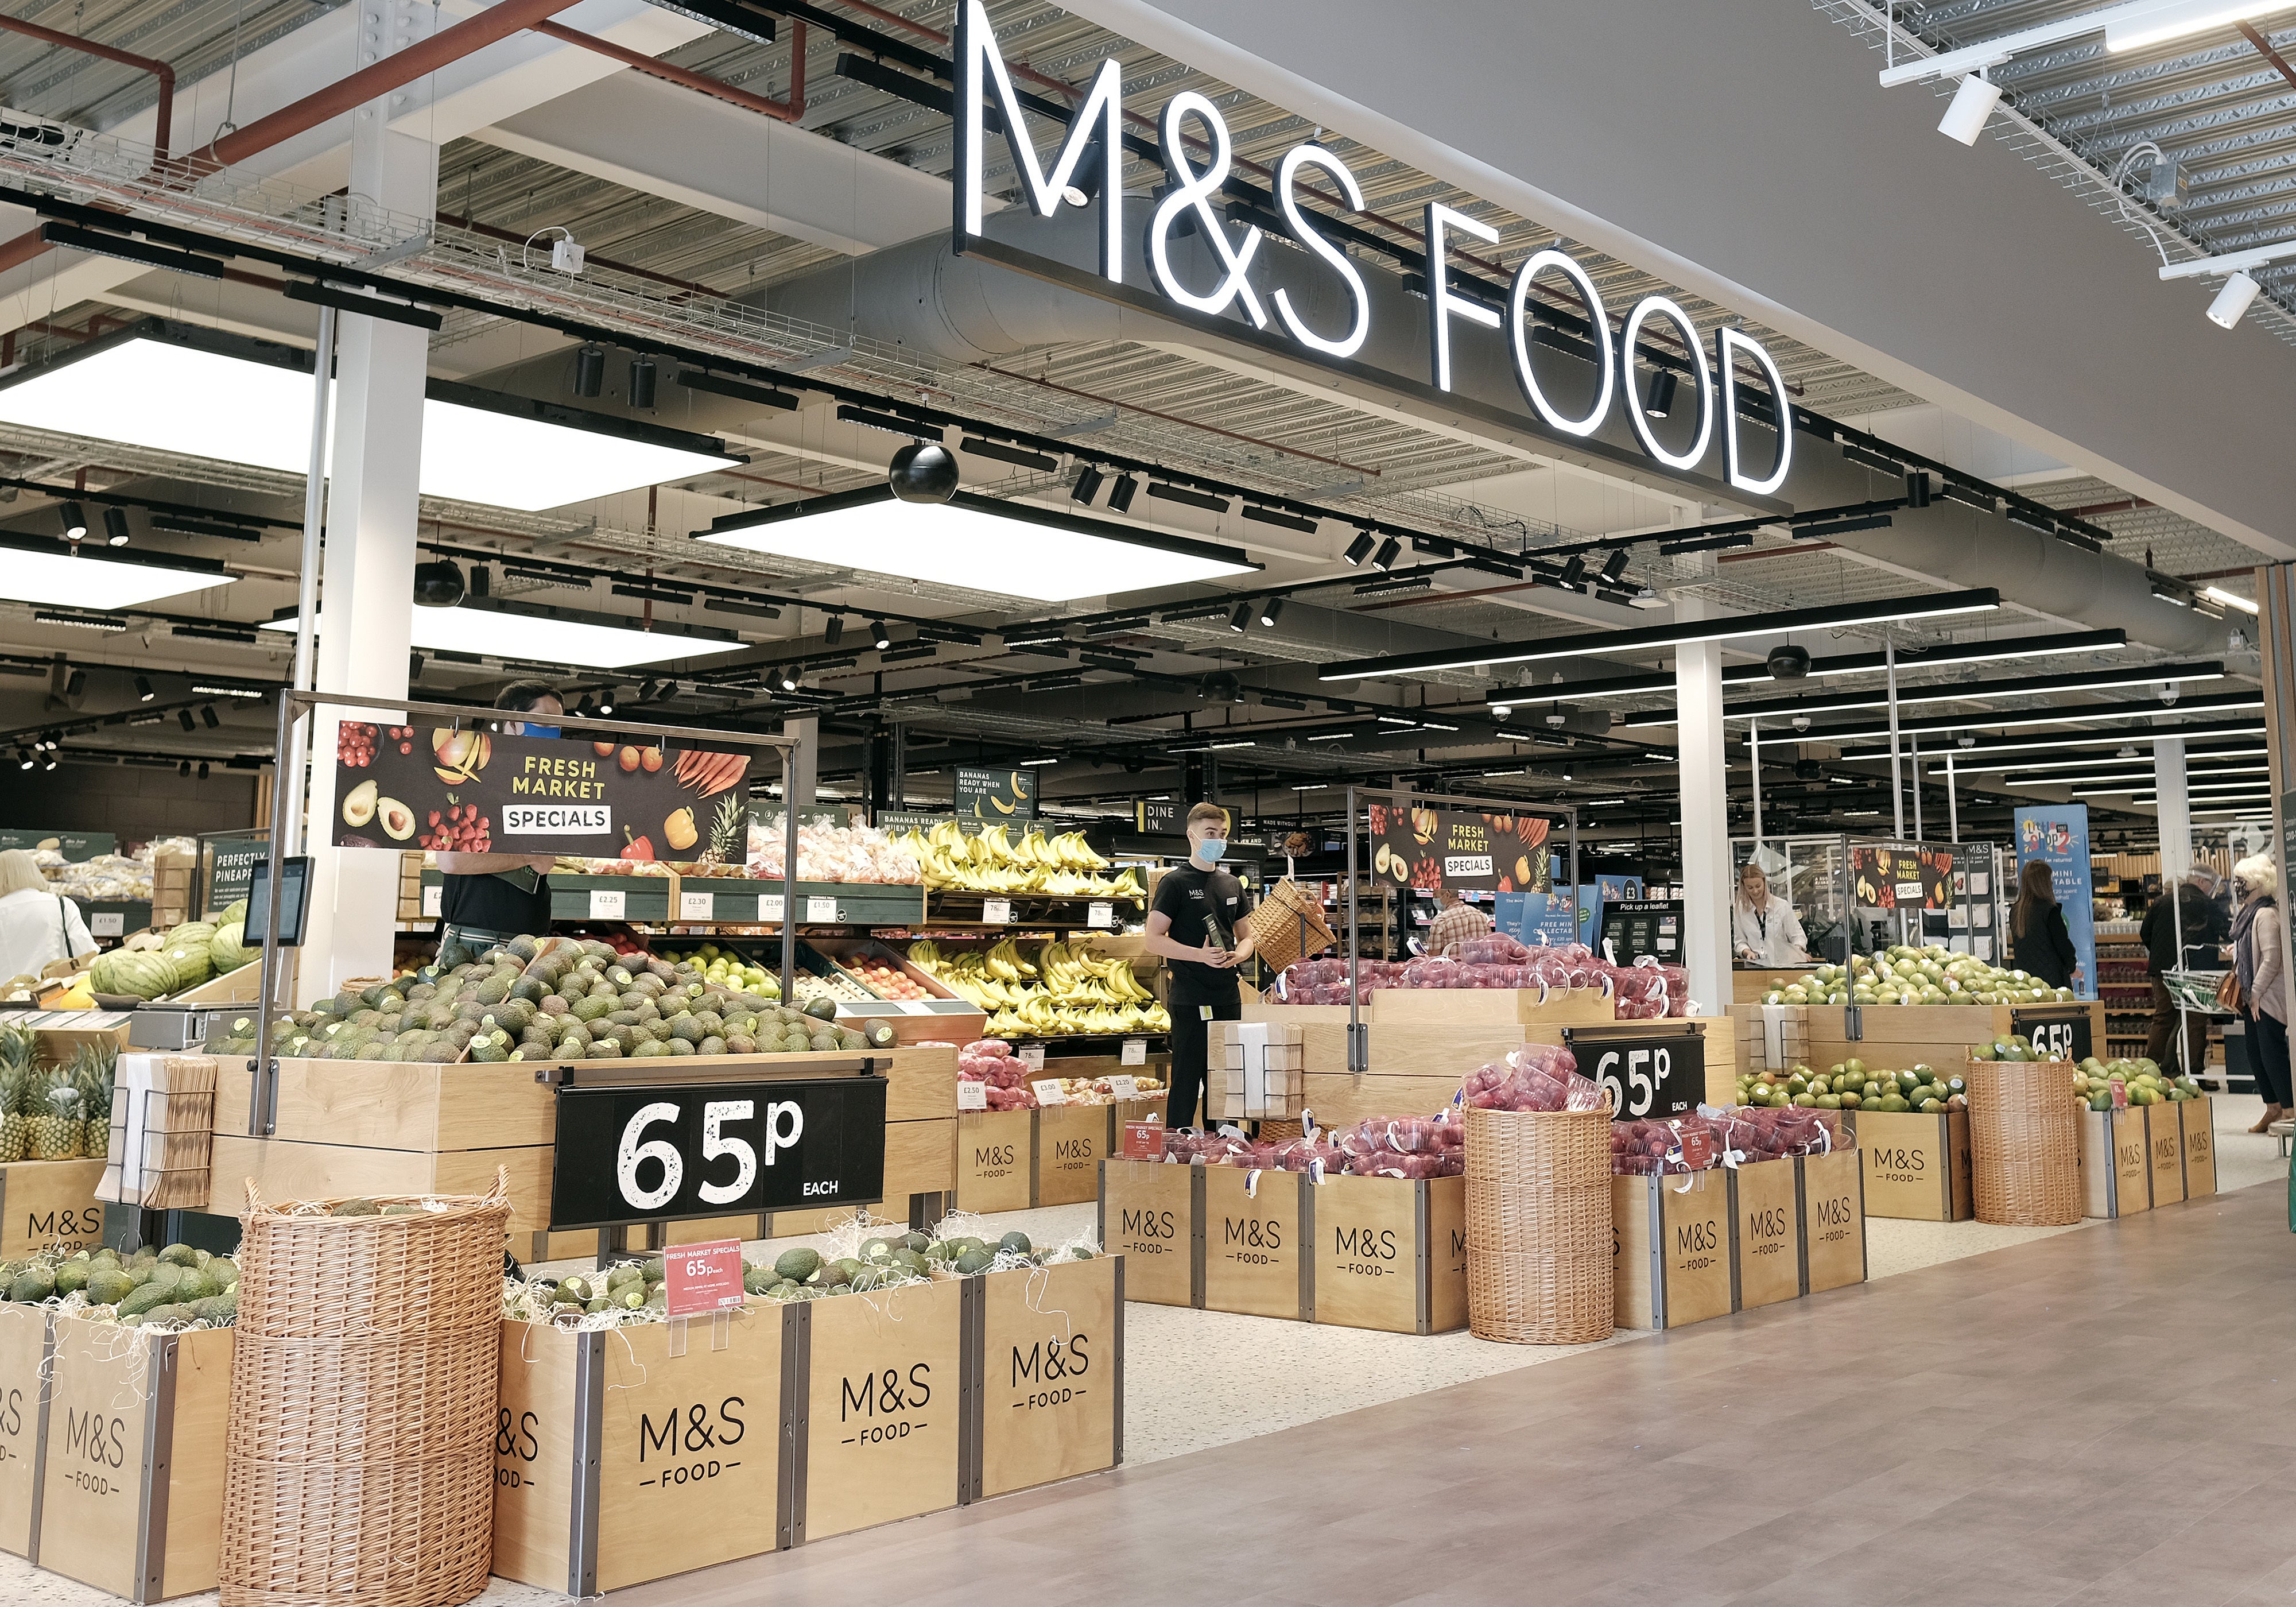 M&S Food: Steve Rowe’s bet on this business helped revive the struggling retailer